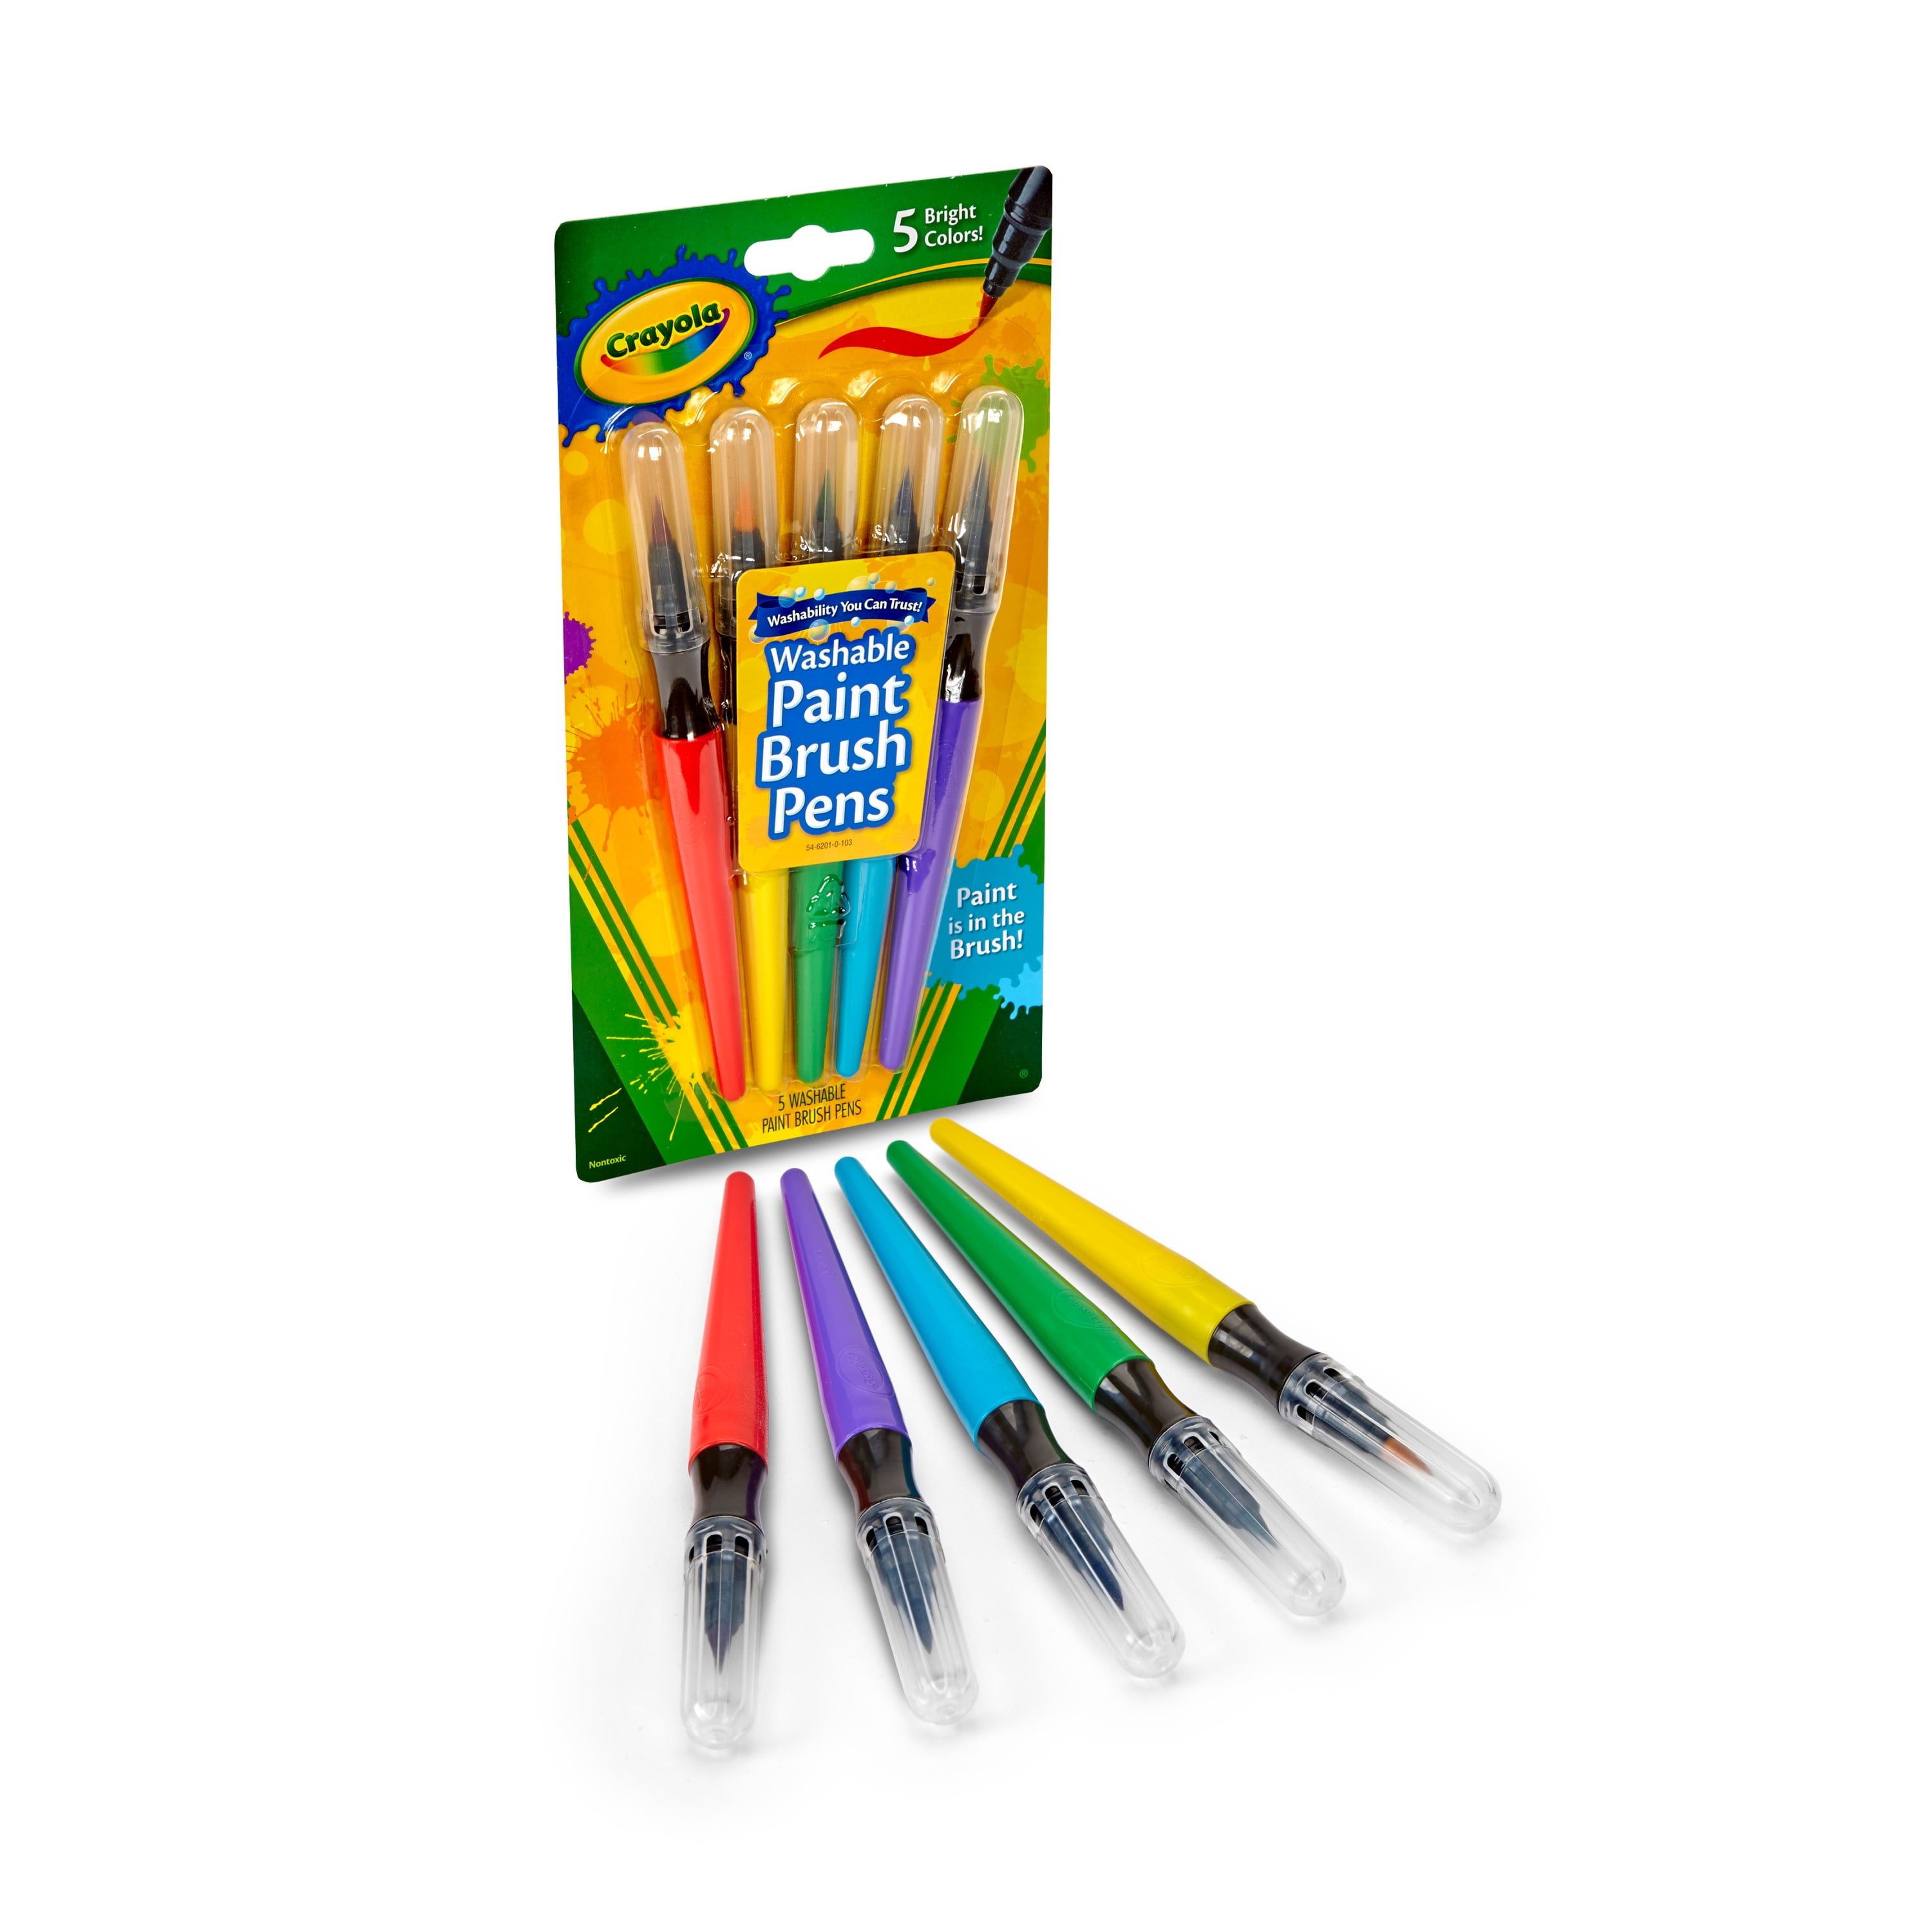 Almost Unschoolers: Crayola Paint Brush Pens - Review